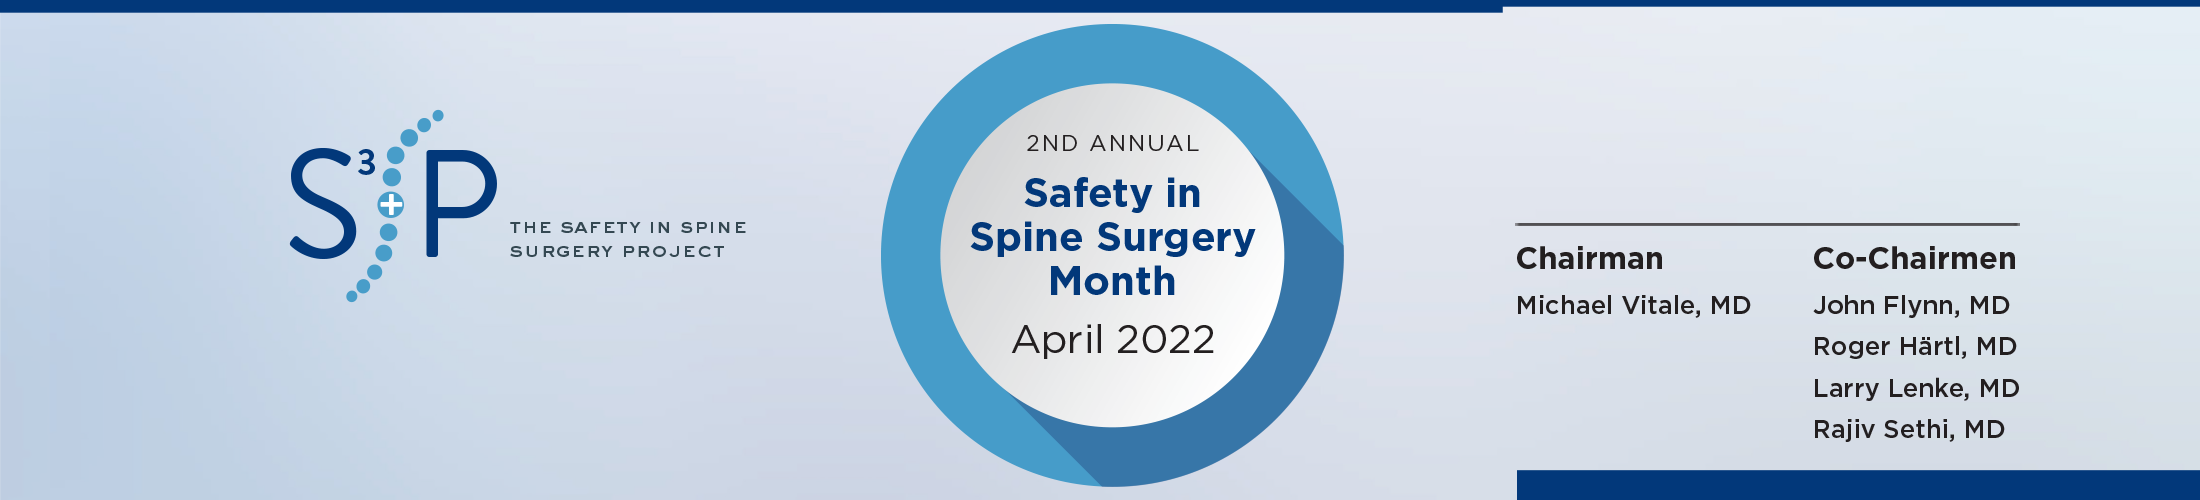 S3P-Safety-in-Spine-Surgery-Month